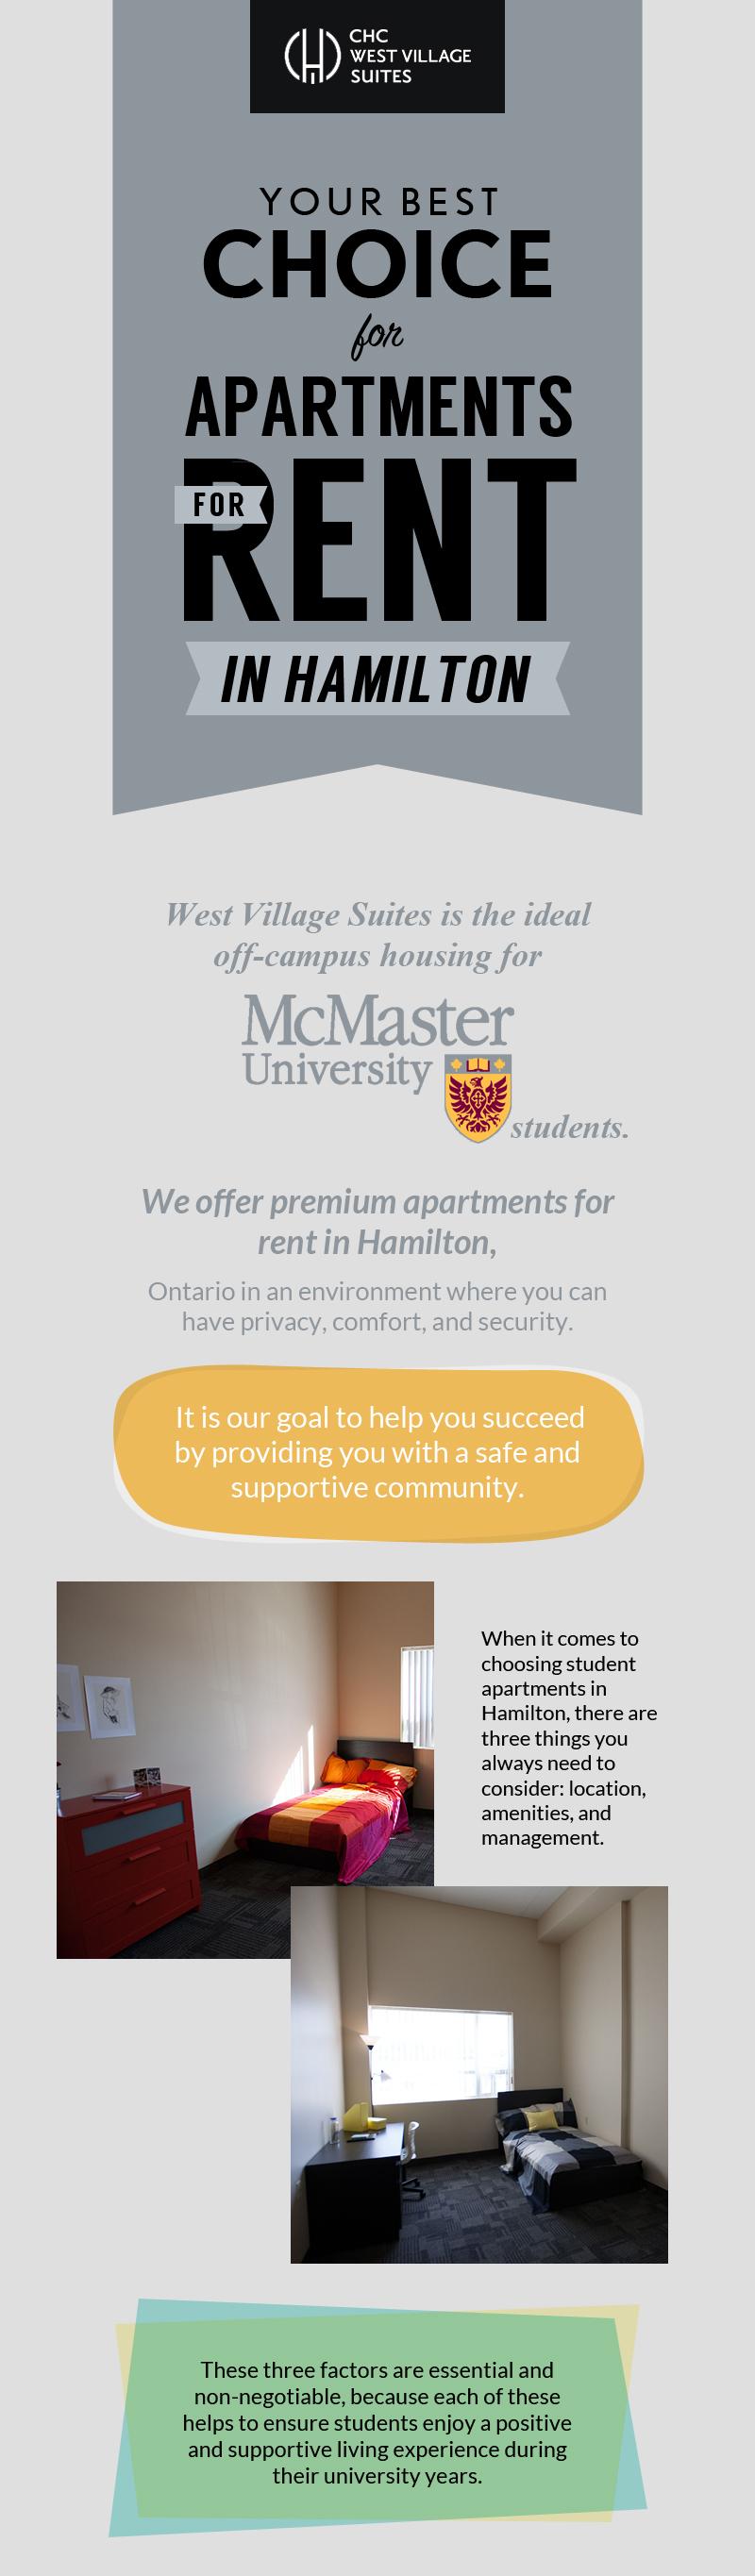 West Village Suites - Your Best Choice for Apartments for Rent in Hamilton